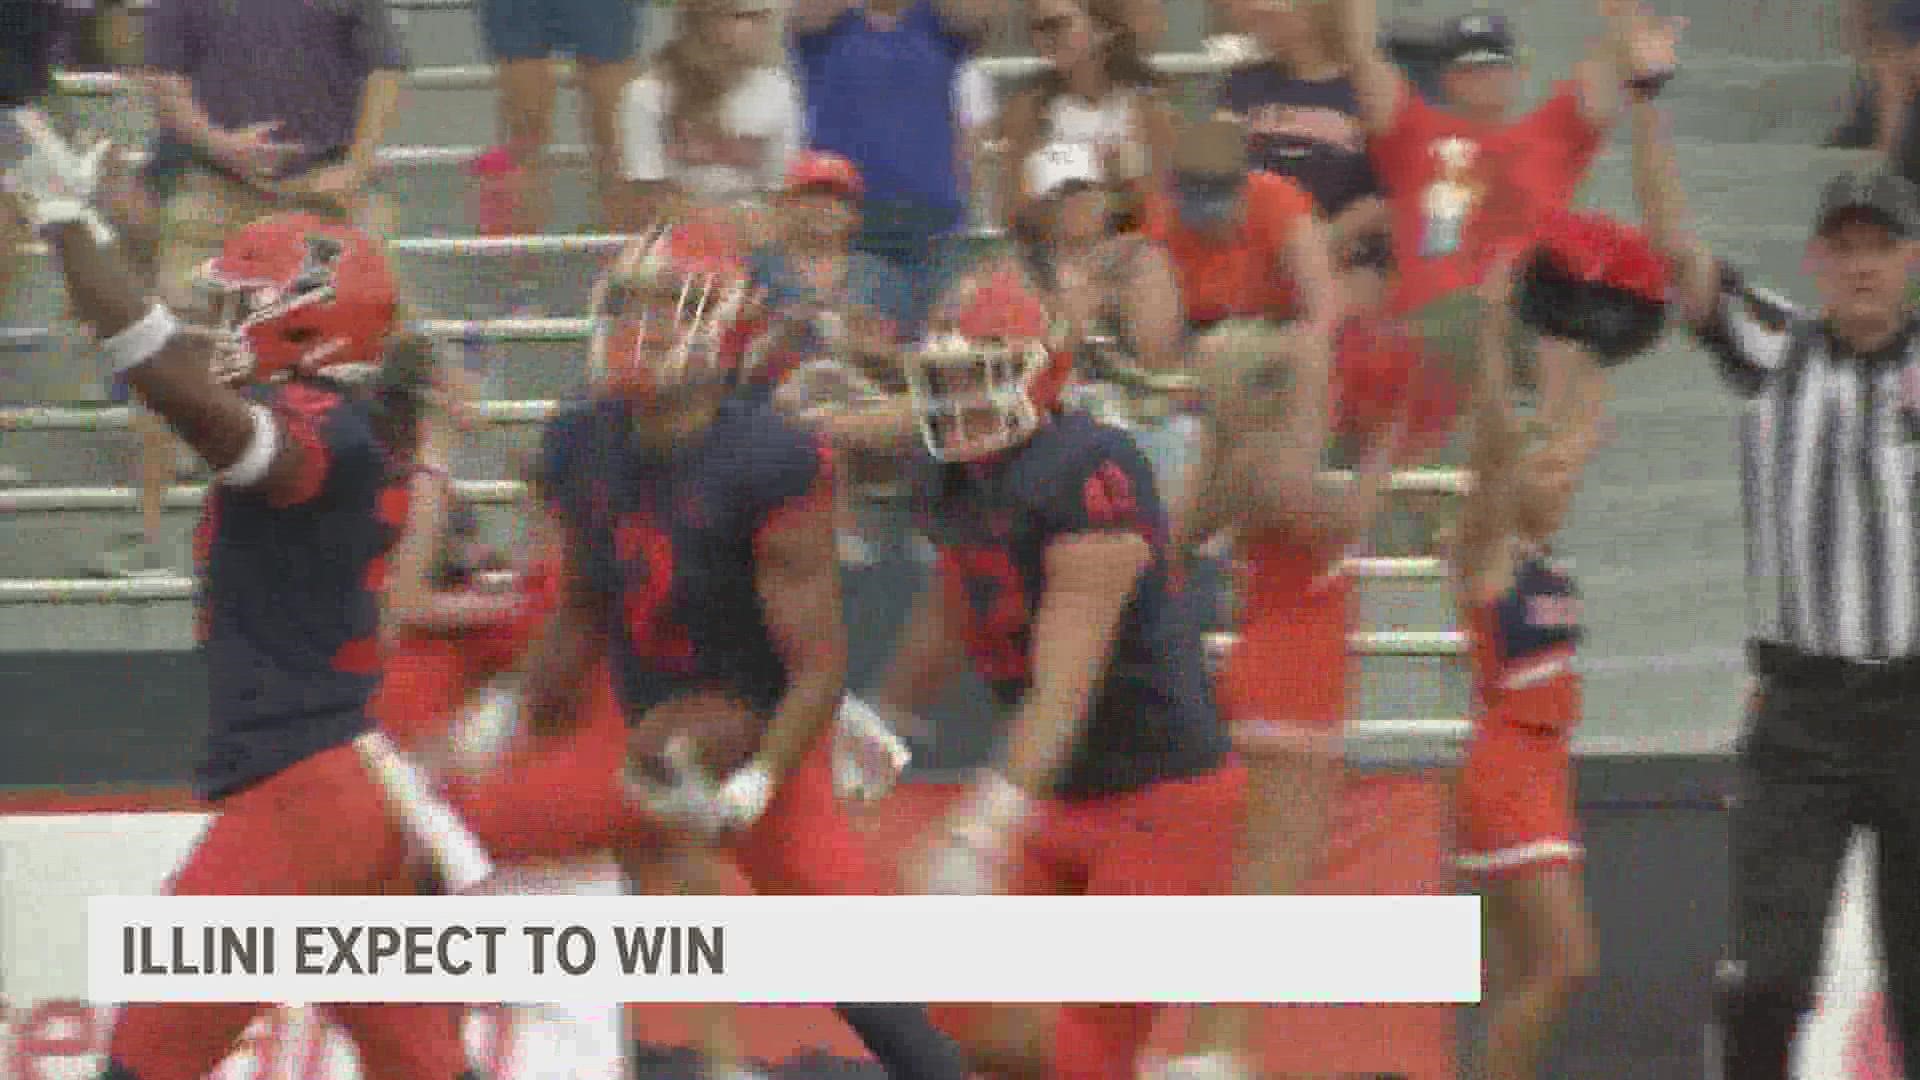 A win against Chattanooga on Thursday will put the Illini halfway to bowl eligibility. Kickoff is at 7:30 p.m.